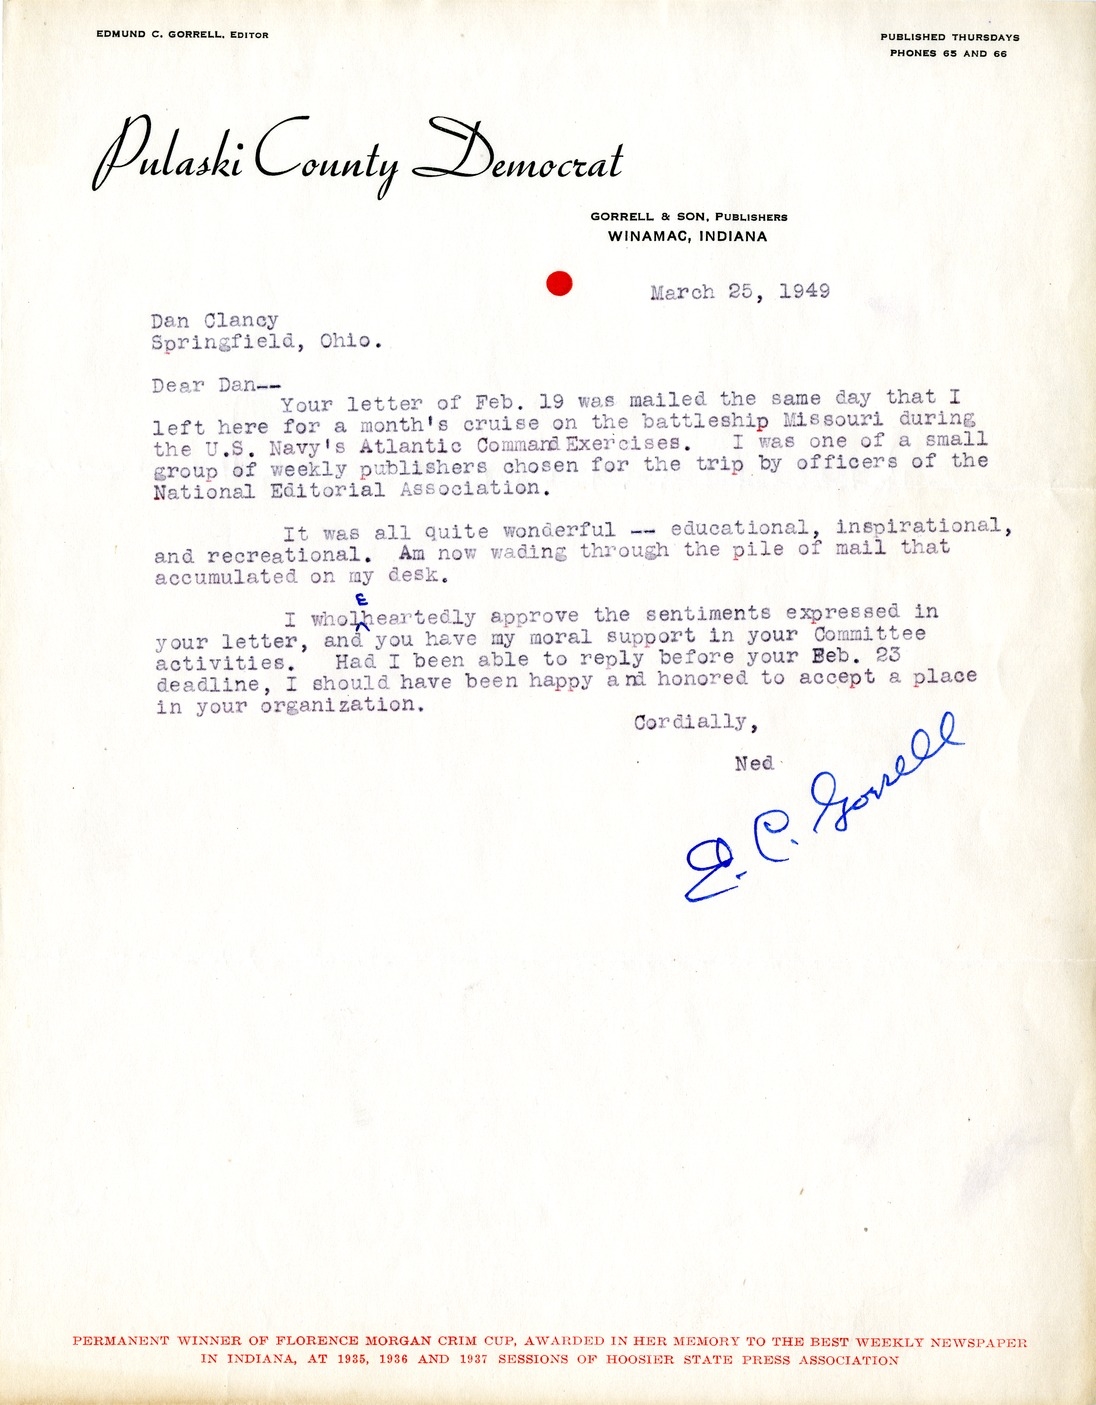 Letter from E. C. Gorrell to Daniel F. Clancy